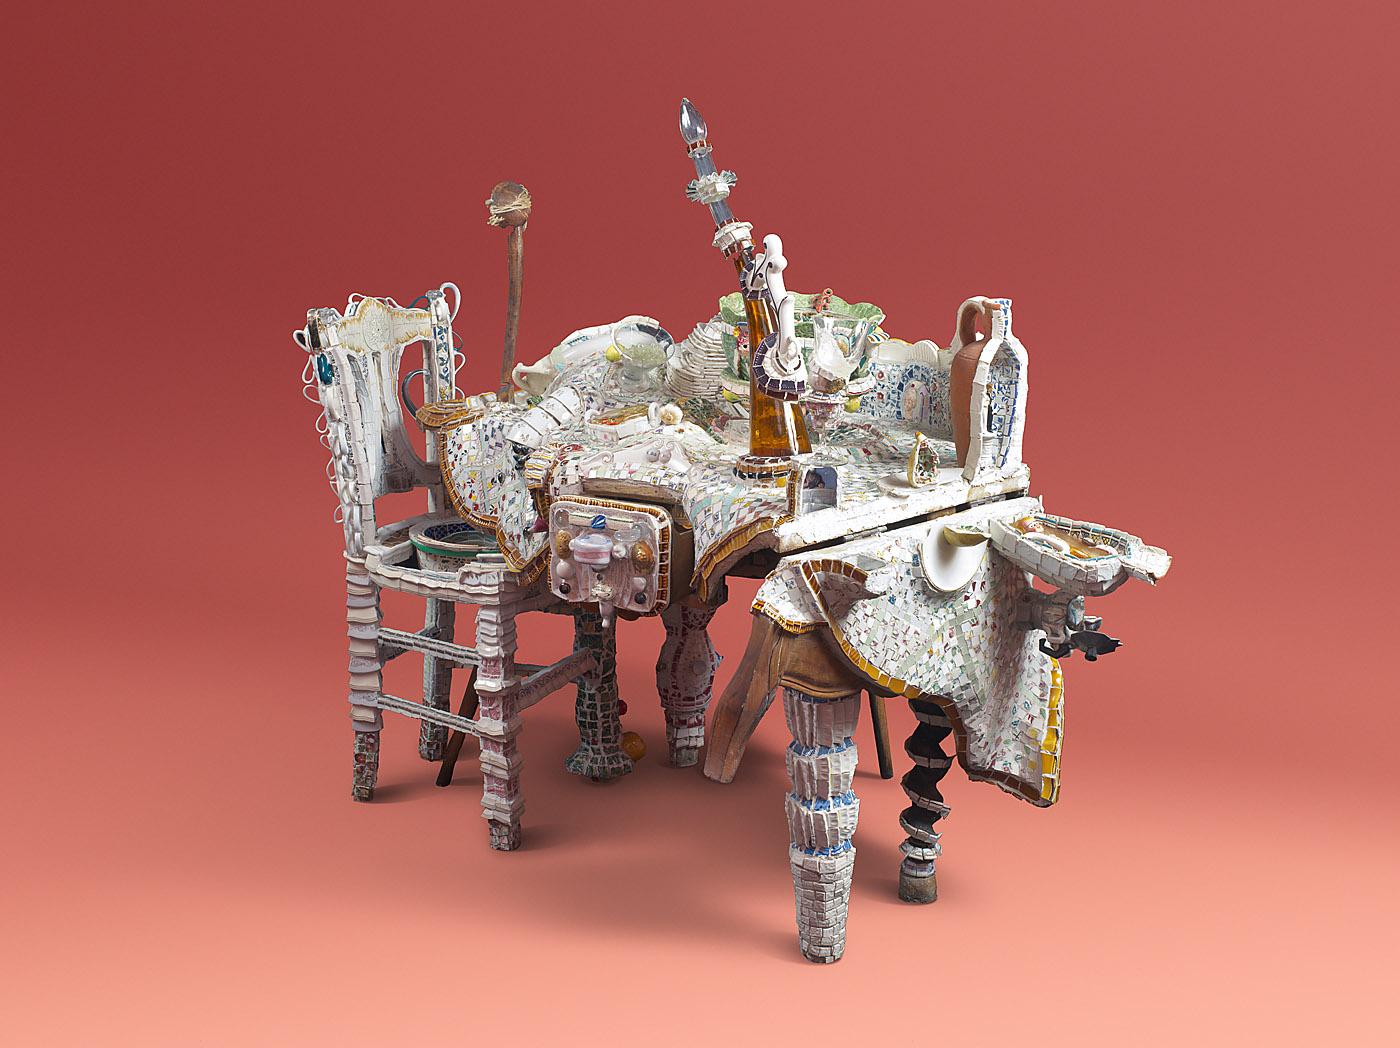 Monica Machado
Born in Lisbonne (Portugal) in 1966. Lives in Paris since 1981.

Technique : wood, furniture leg, armrest, chair, drawer, wiring, mortar, tow, water pump, lighting, inclusion-resin, tableware and fragments of crockery as food and